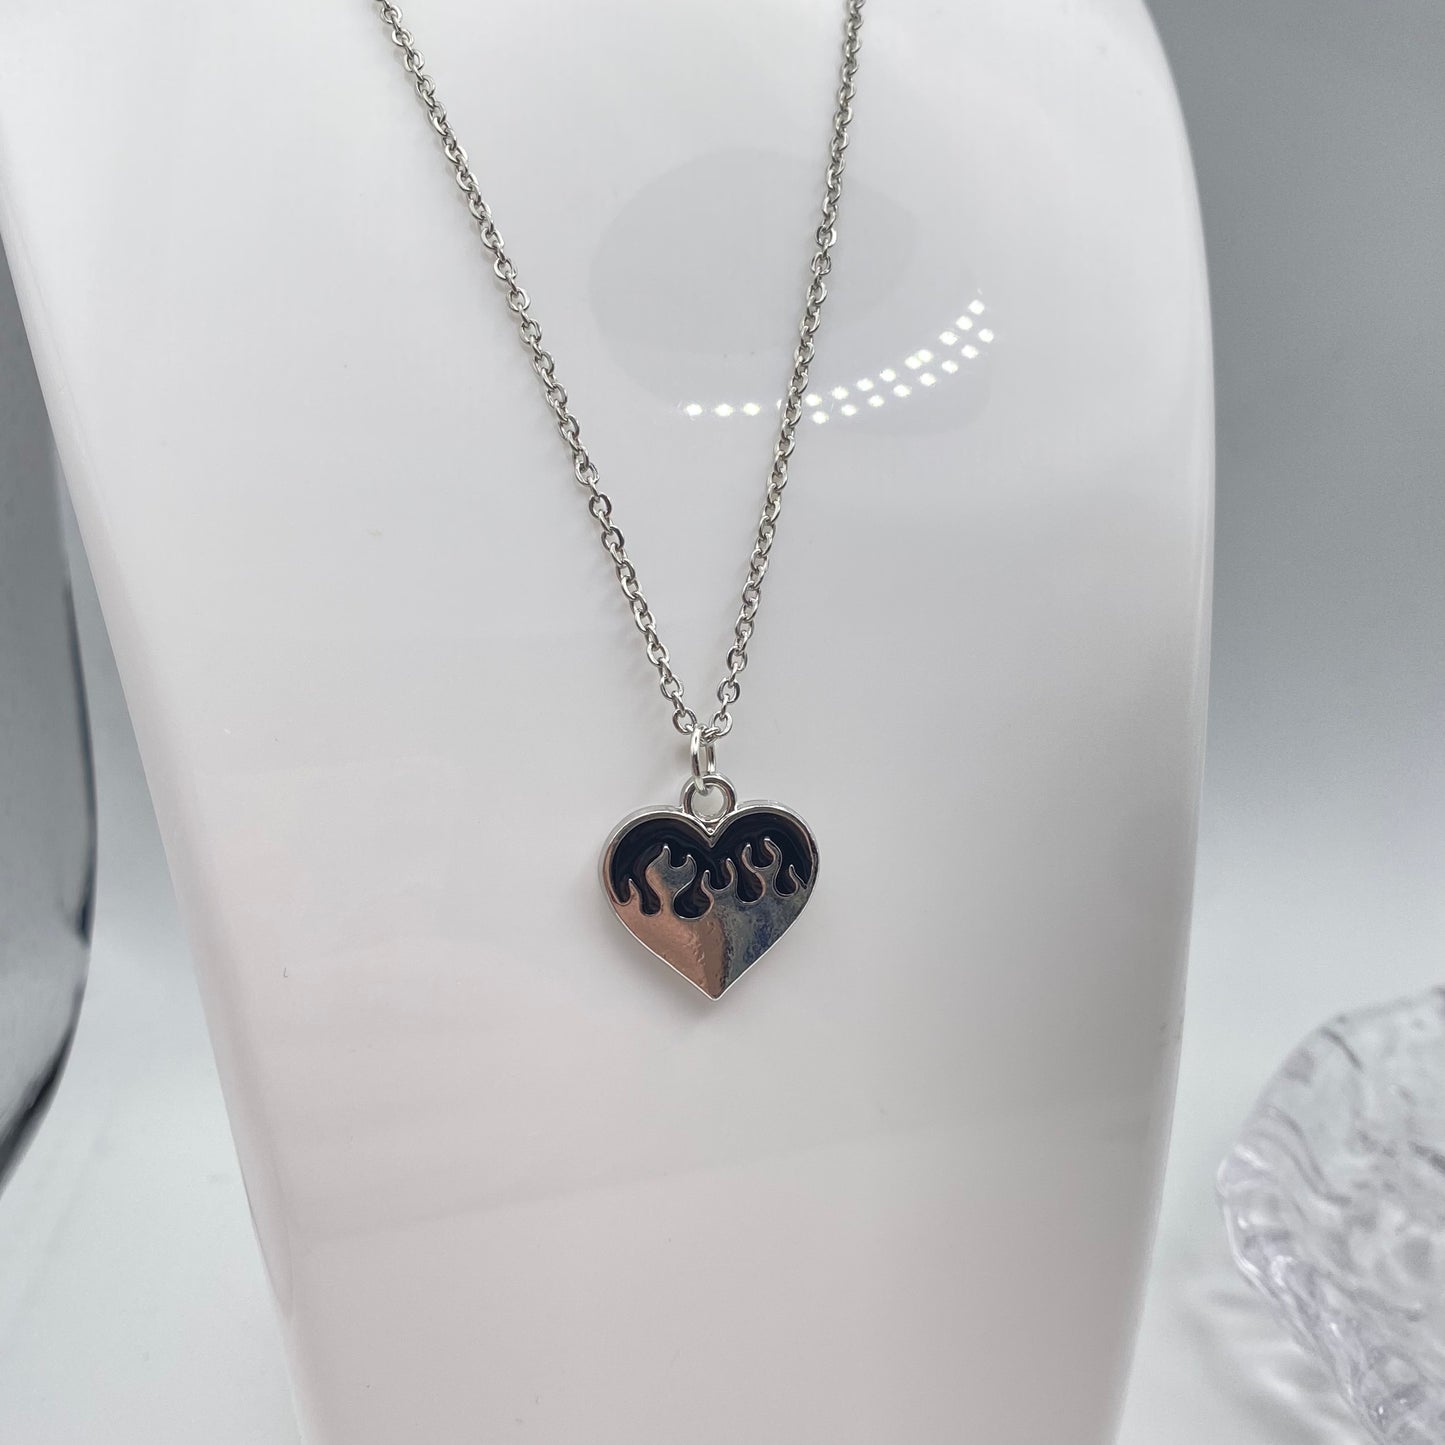 Black Flame Heart Necklace